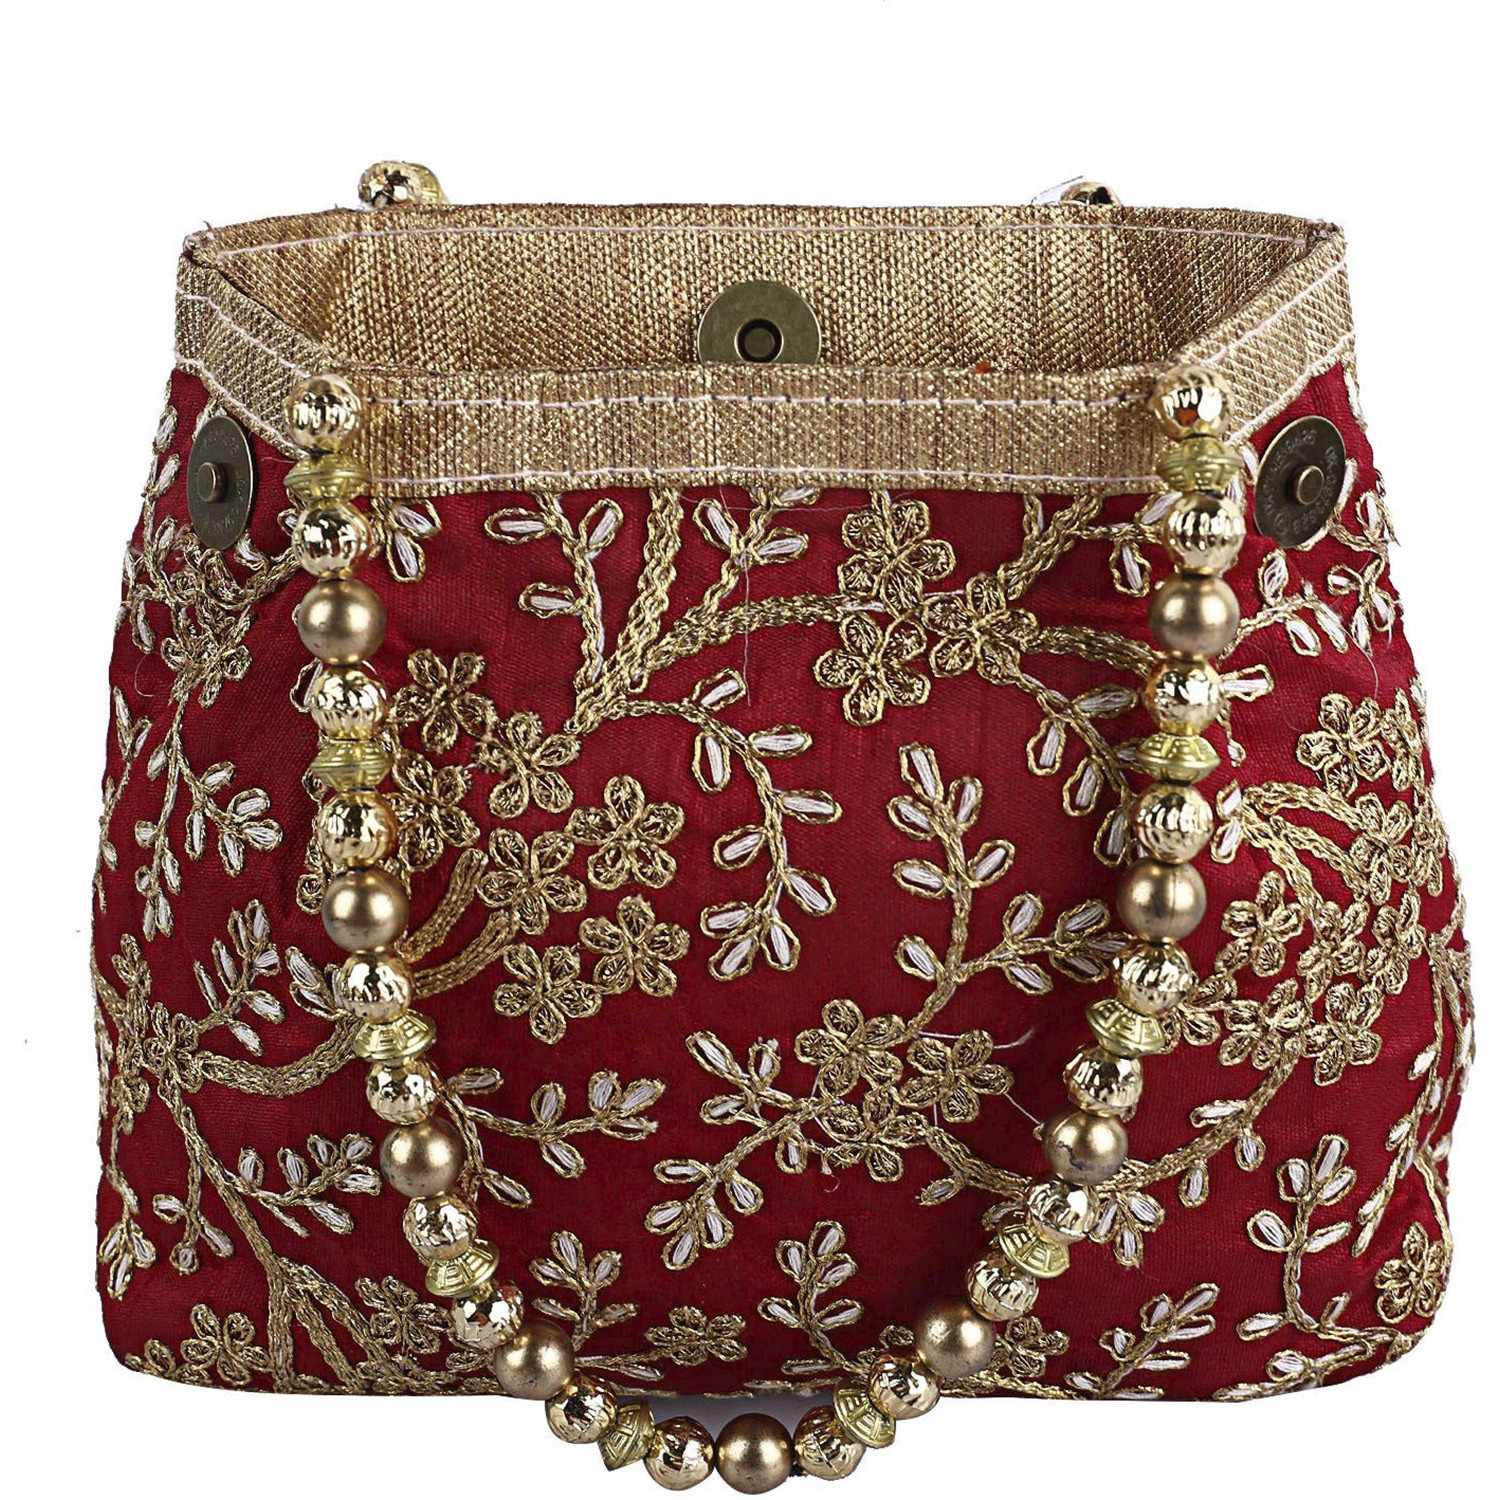 Kuber Industries Attractive Embroidery Polyester Hand Purse & Artificial Pearls Handle With 3 Magnetic Lock for Woman,Girls (Marron)